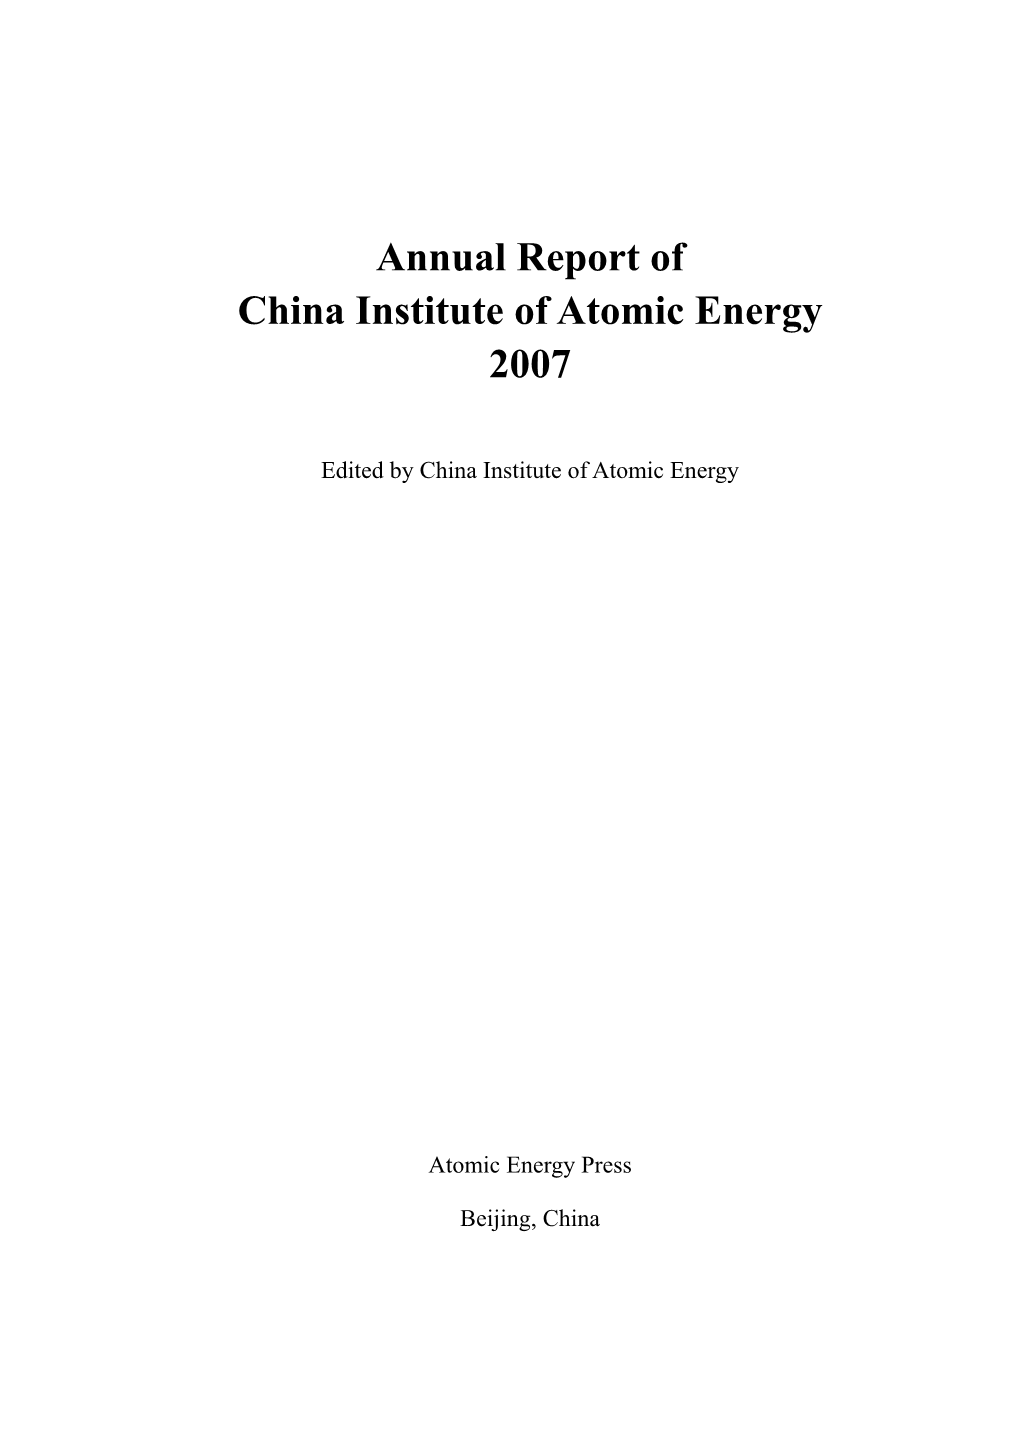 Annual Report of China Institute of Atomic Energy 2007